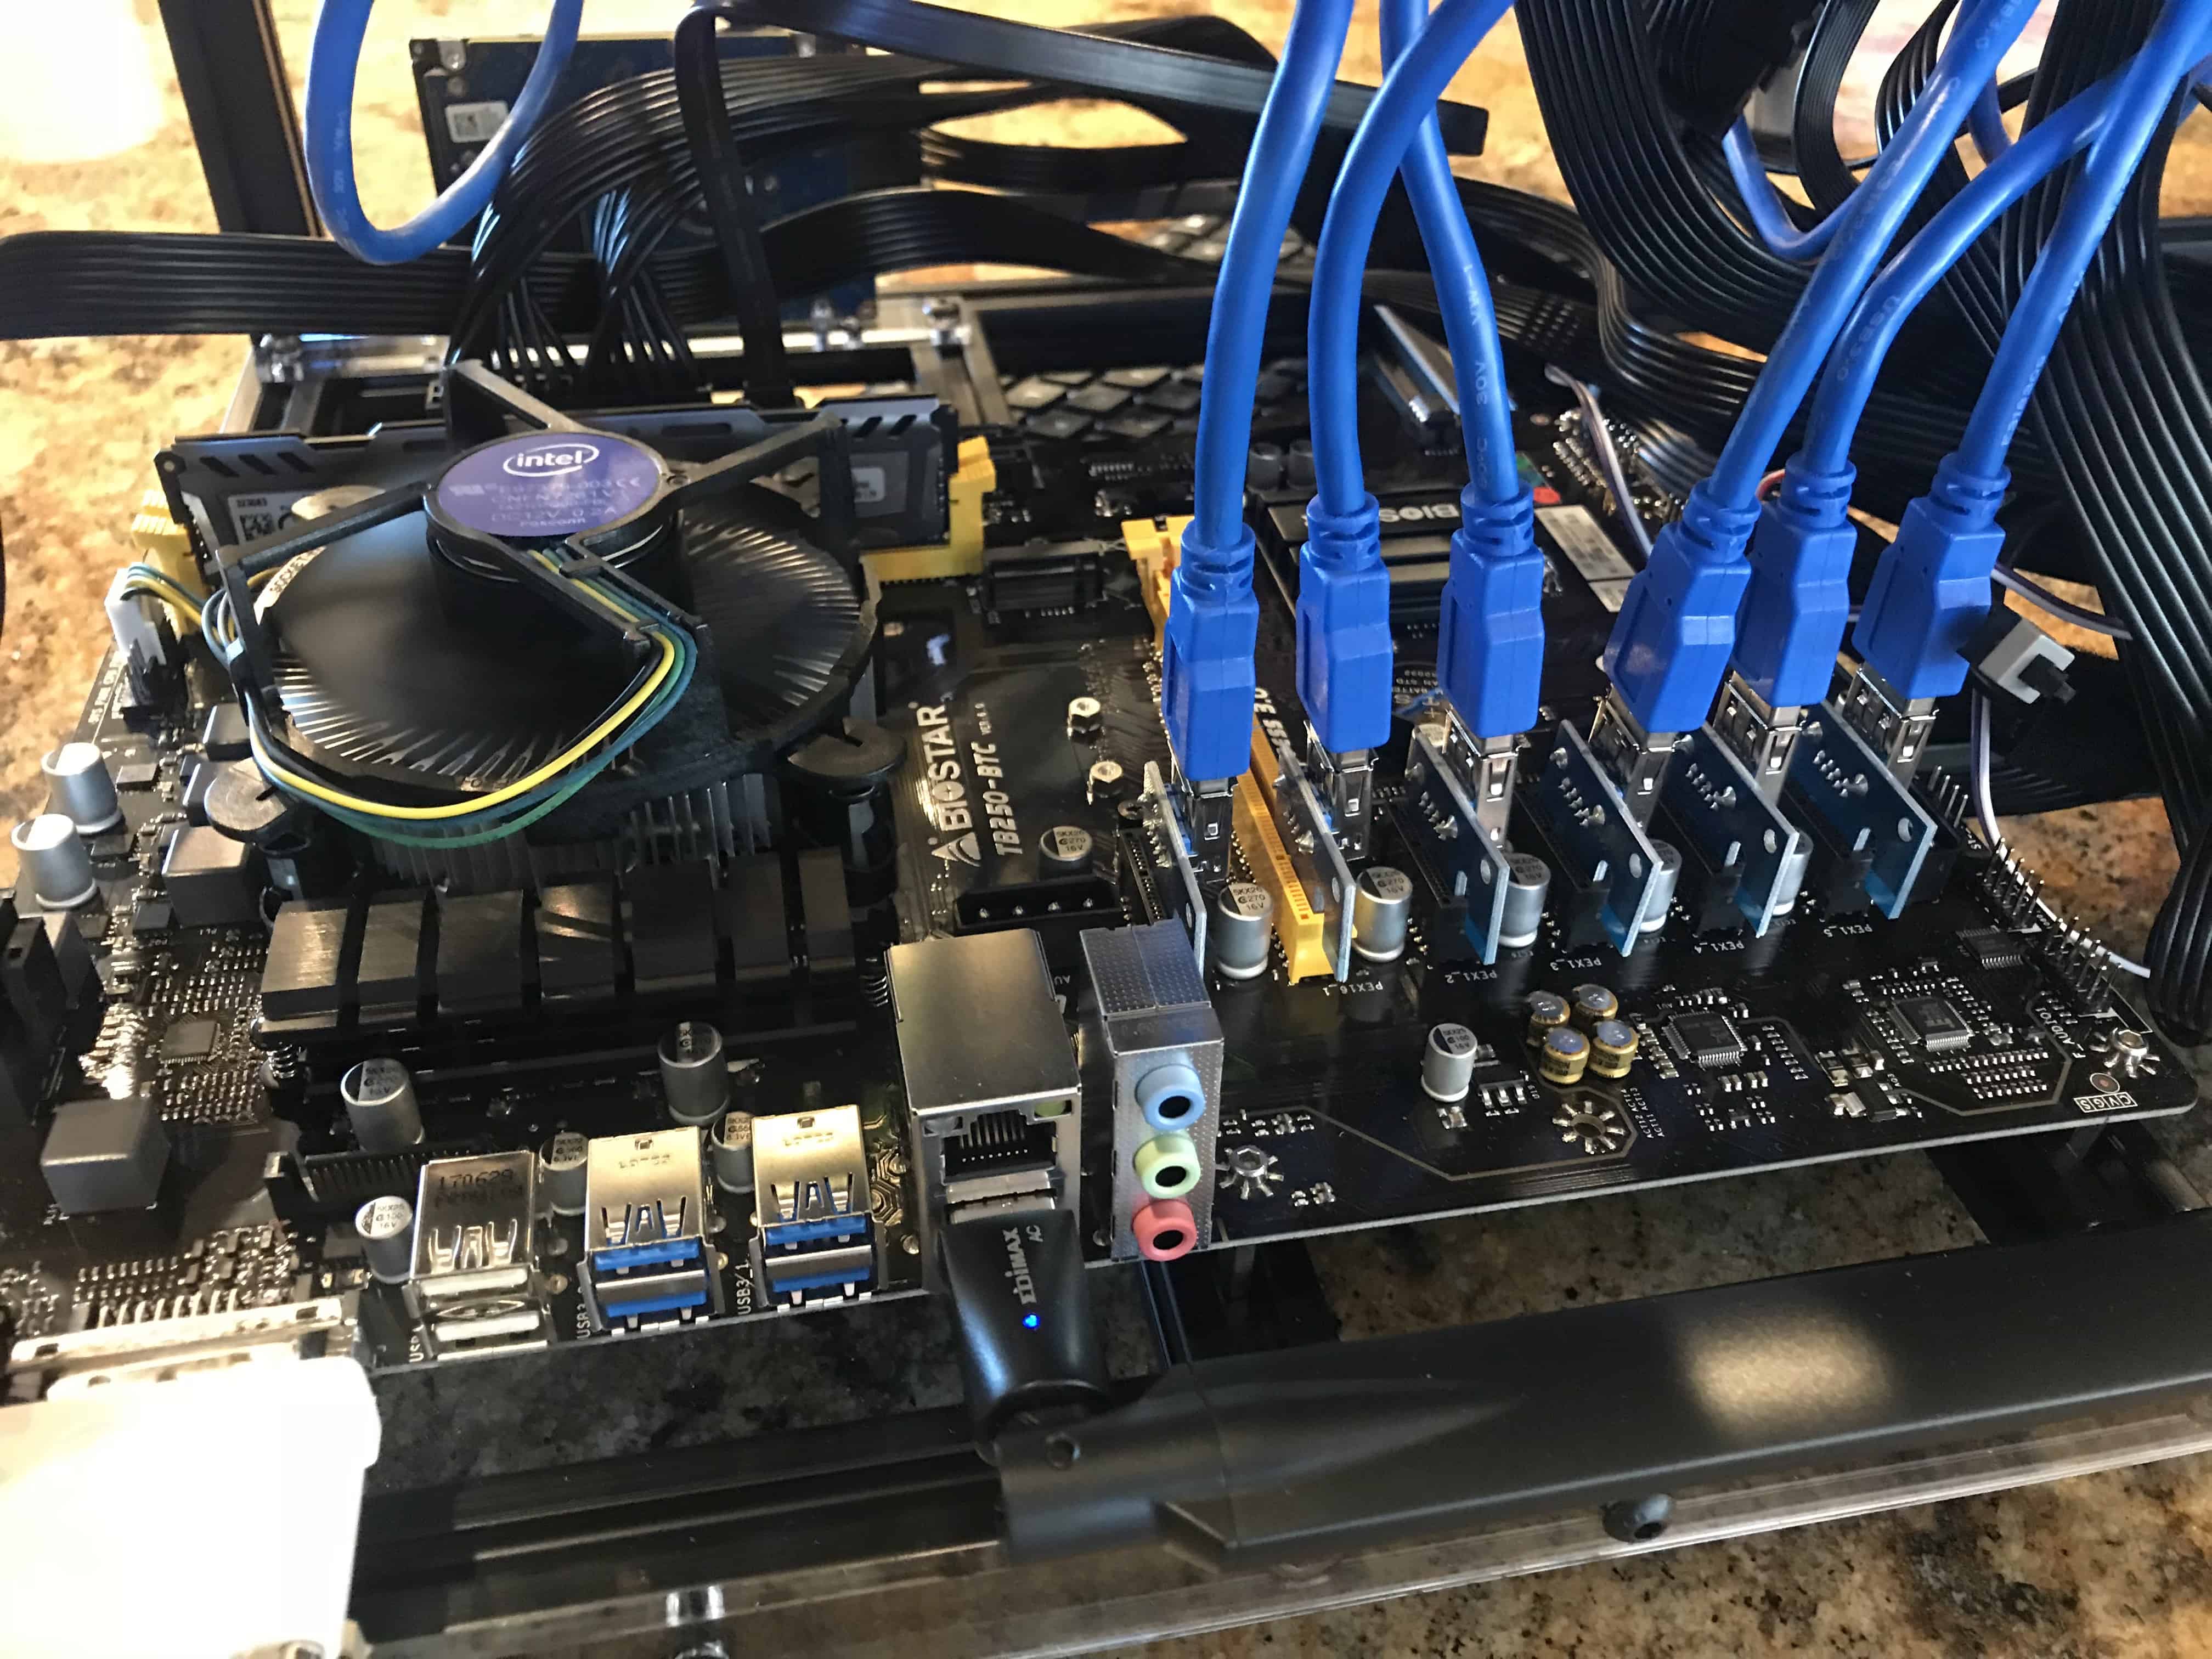 Tour of my Mining Rig - The Geek Pub